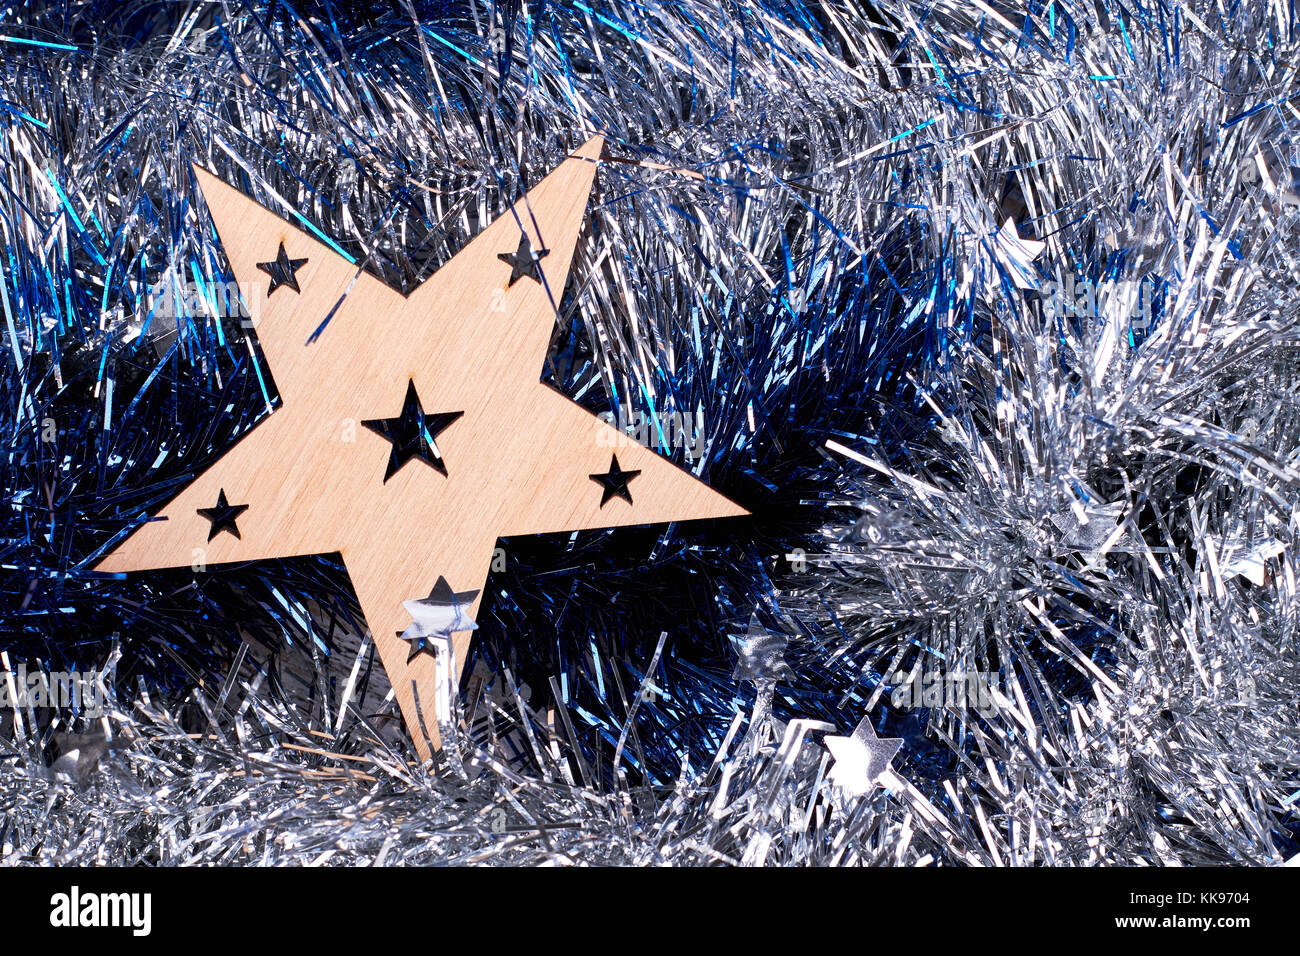 Cut out wooden star on tinsels background. Stock Photo